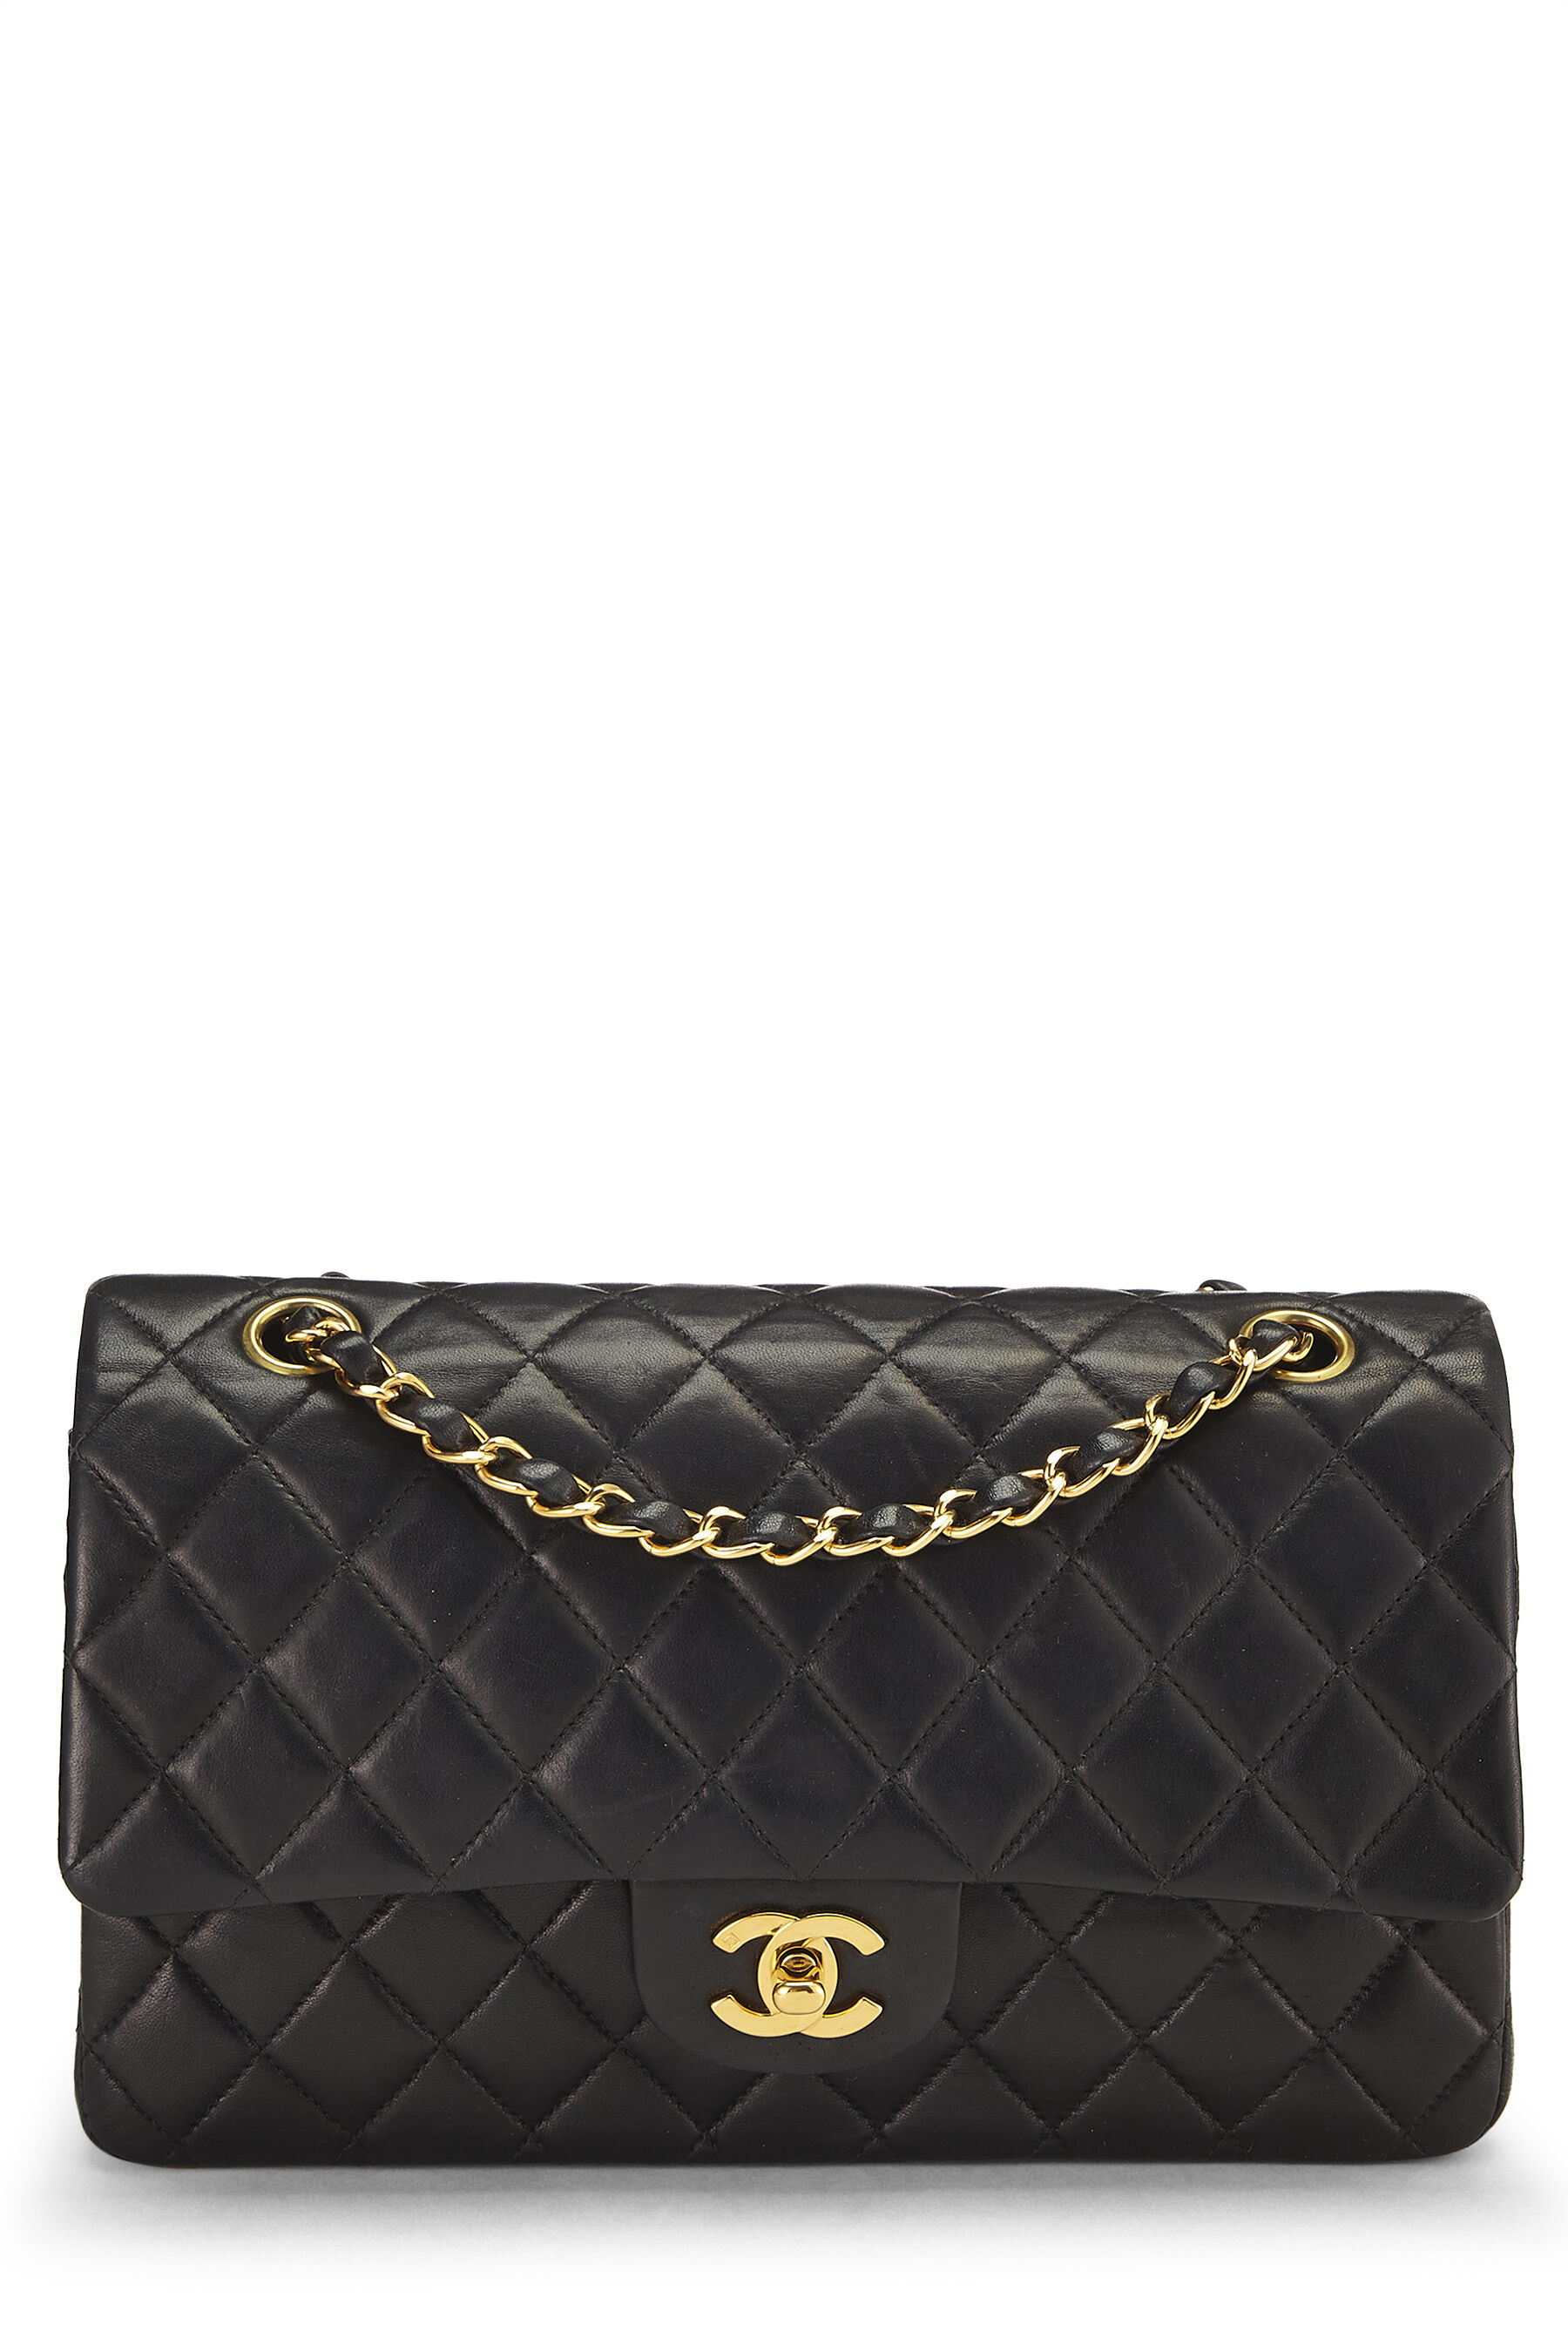 Chanel - Black Quilted Lambskin Classic Double Flap Small